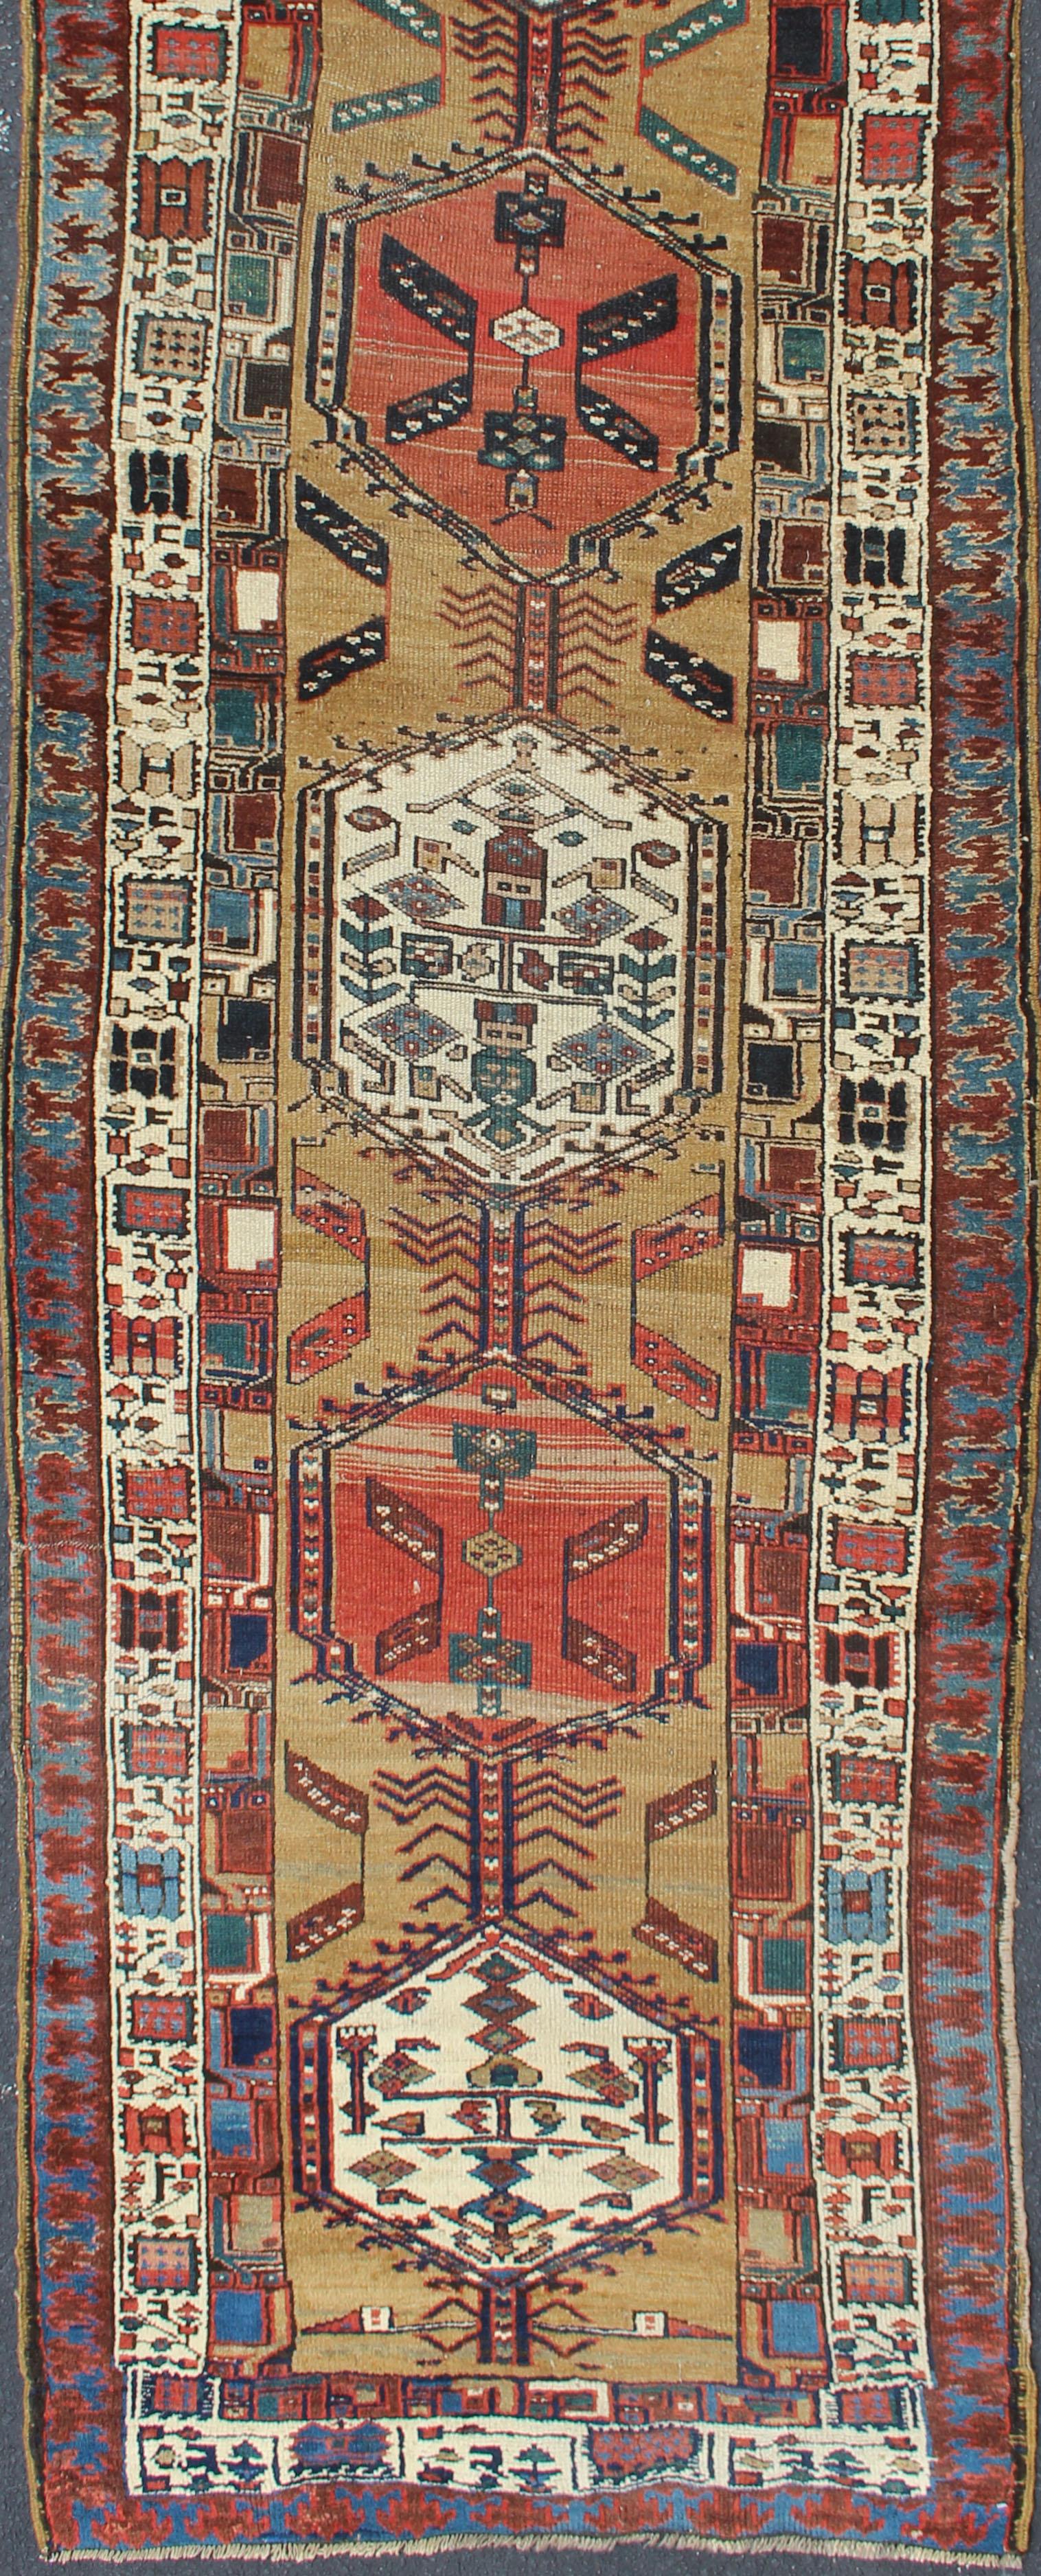 Antique Persian Tribal Serab runner, rug/n15-0501, origin/iran.

The camel field in this piece is decorated with ivory strap work, navy blue lattice work and stylized Boteh and floral elements. A beautifully drawn reciprocal trefoil guard border